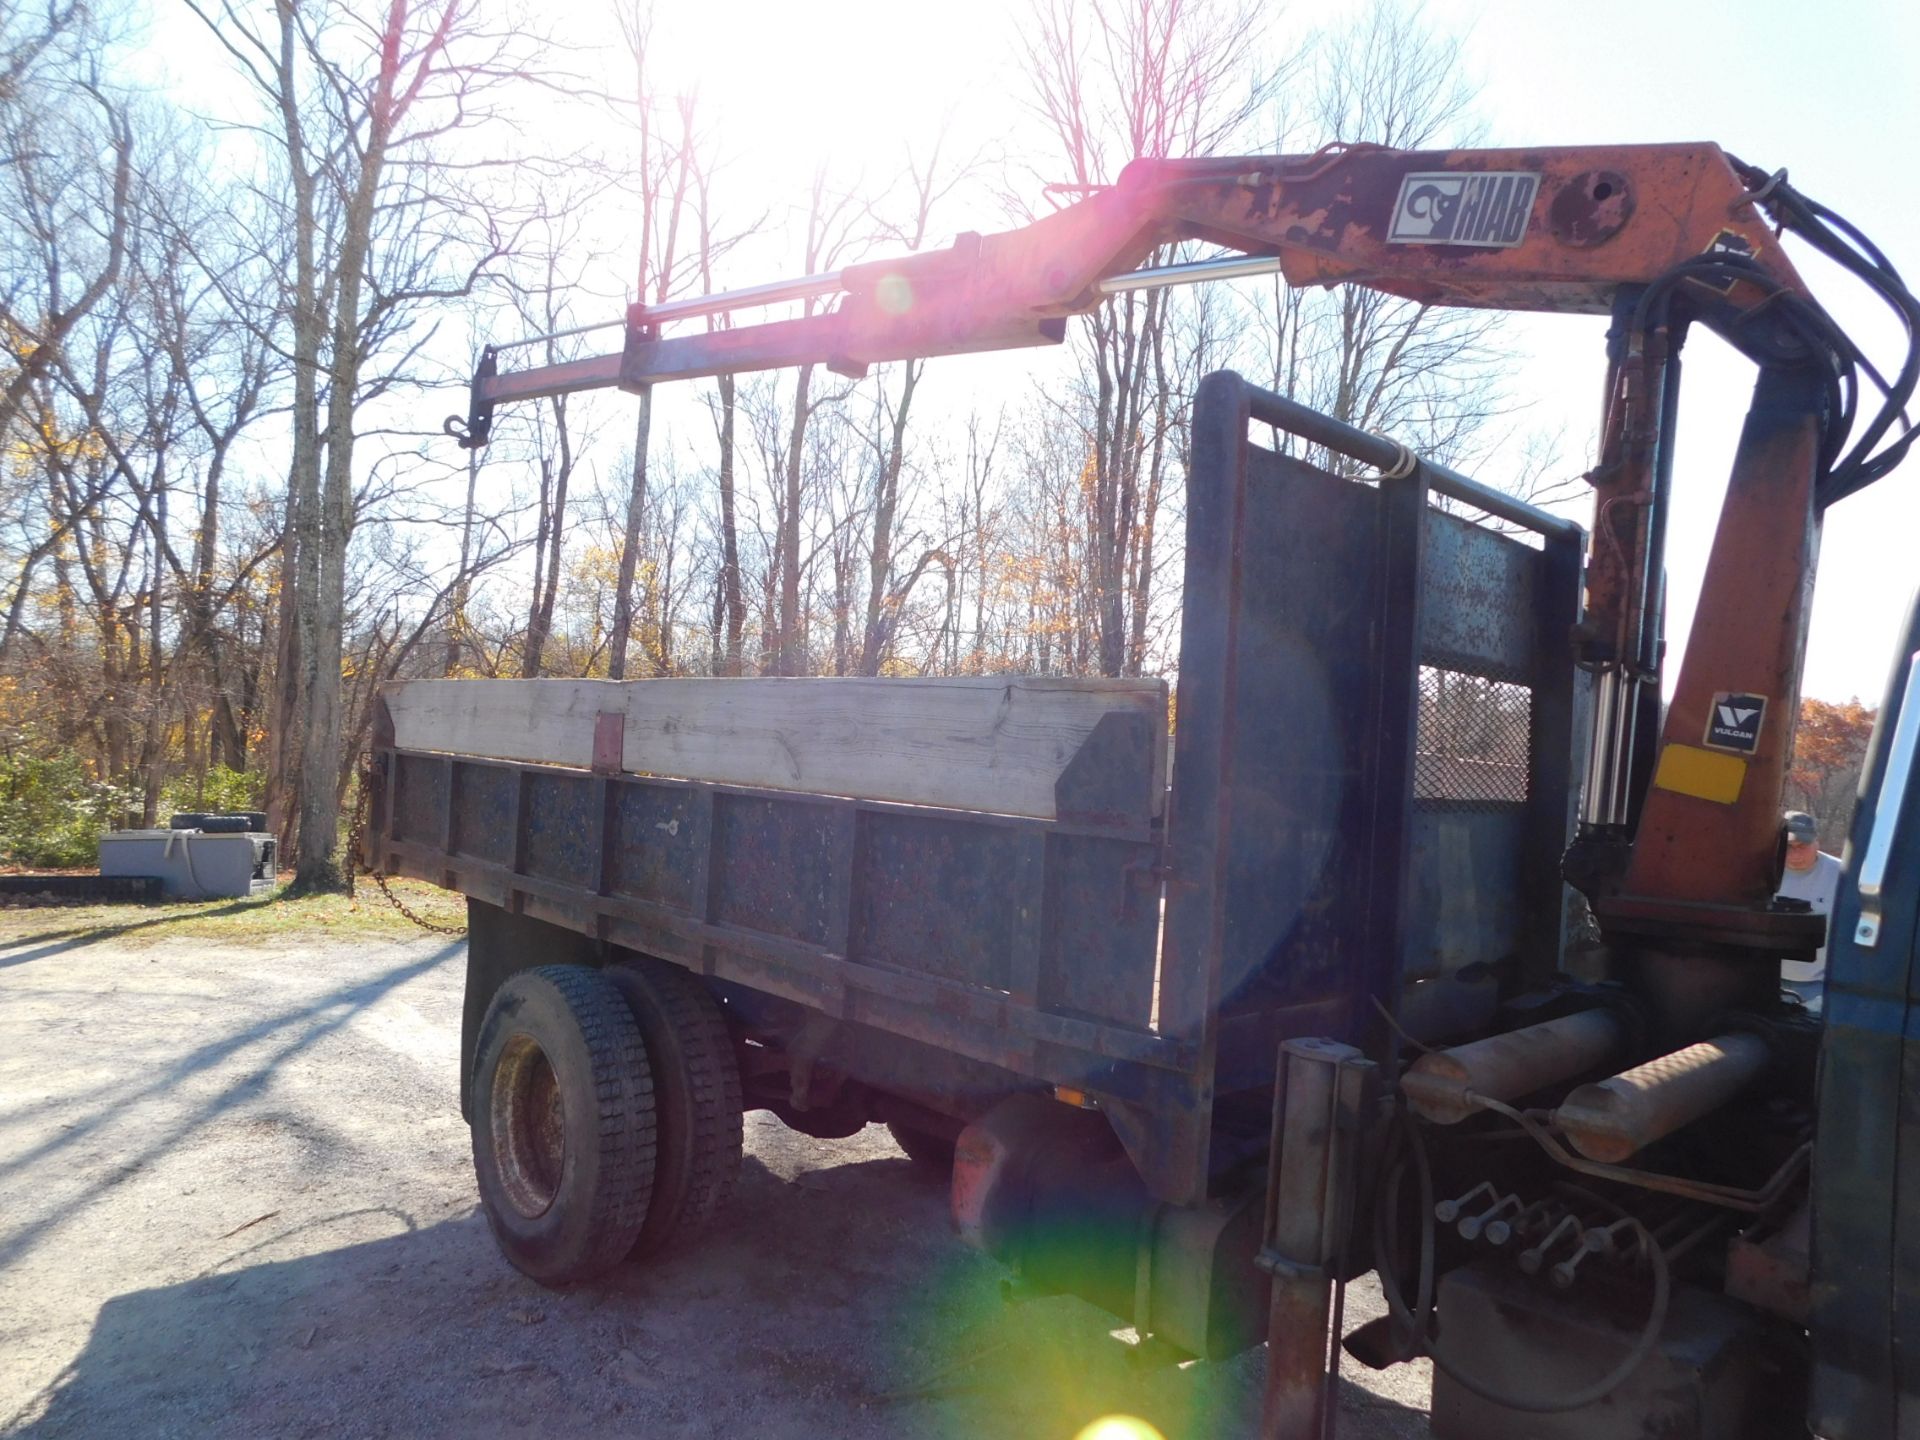 1993 Ford F700 Single Axle Boom Lift Truck, VIN 1FDNK74C0PVA27527, 5-Speed Manual Trasnsmission, - Image 2 of 33